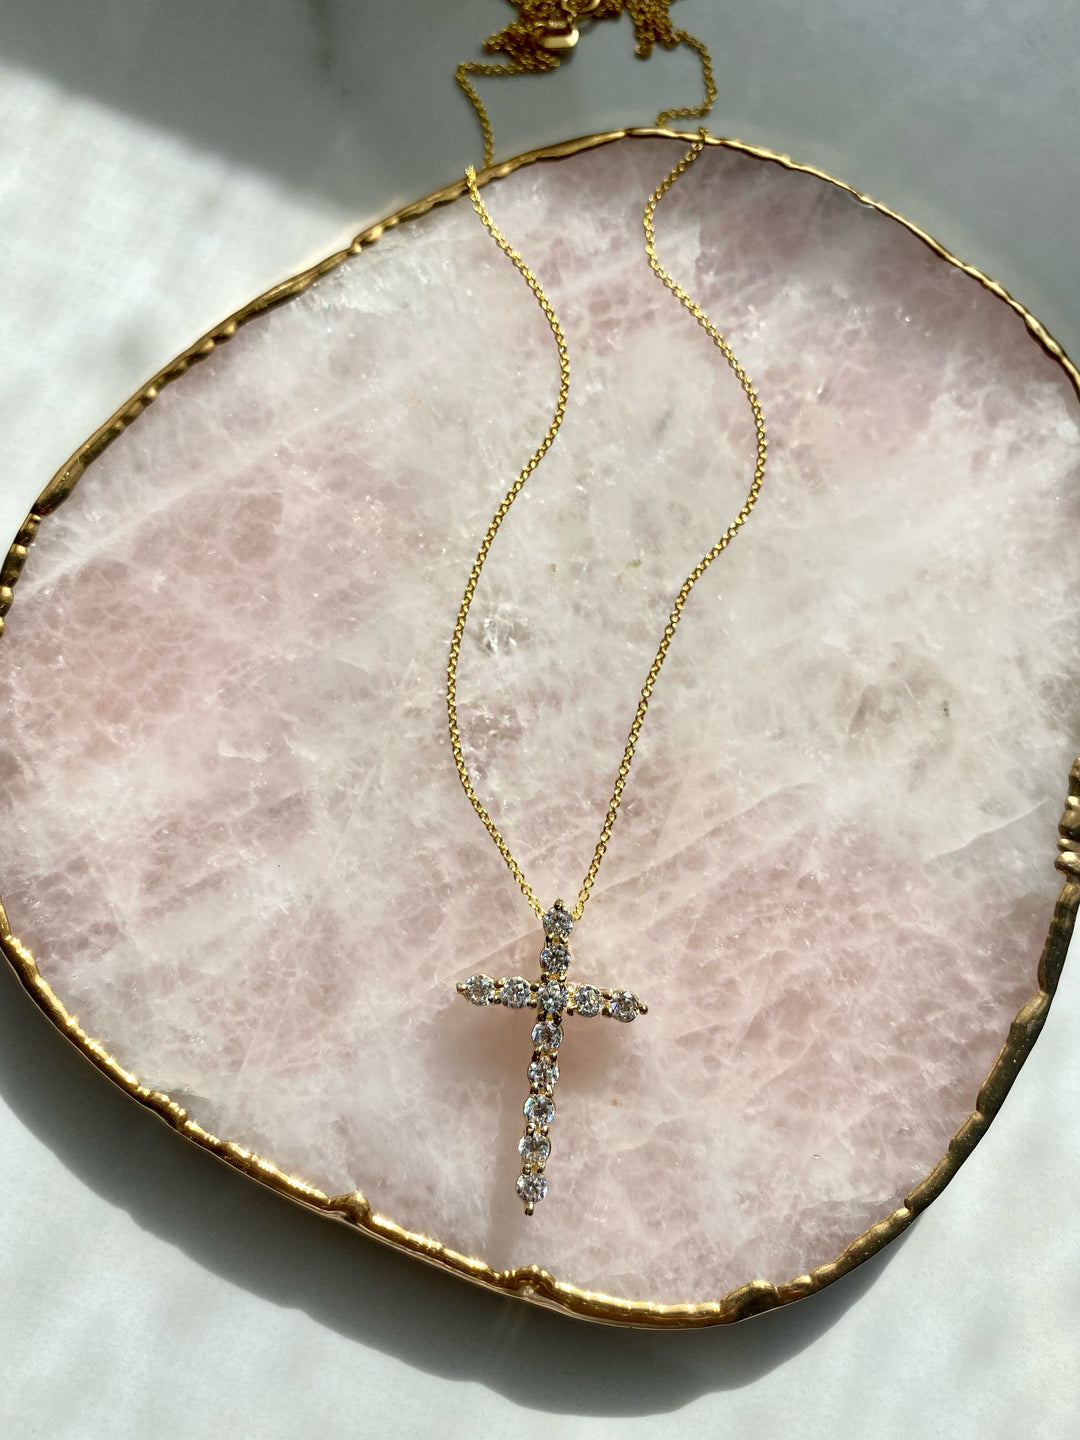 14k Yellow Gold and CZ Cross Necklace